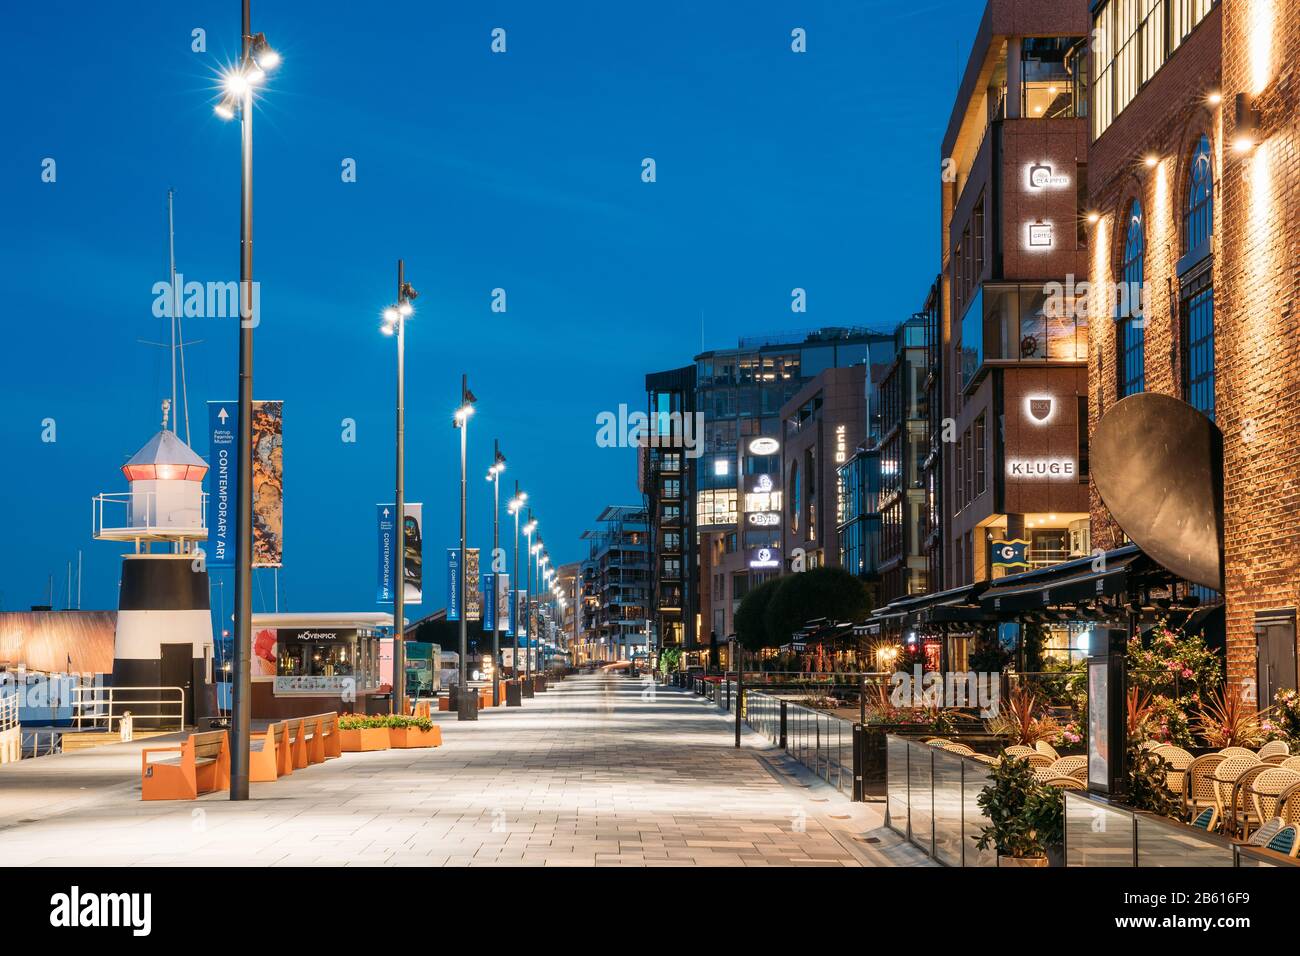 Oslo, Norway - June 24, 2019: Night View Embankment And Residential Multi-storey Houses In Aker Brygge District. Summer Evening. Residential Area Refl Stock Photo